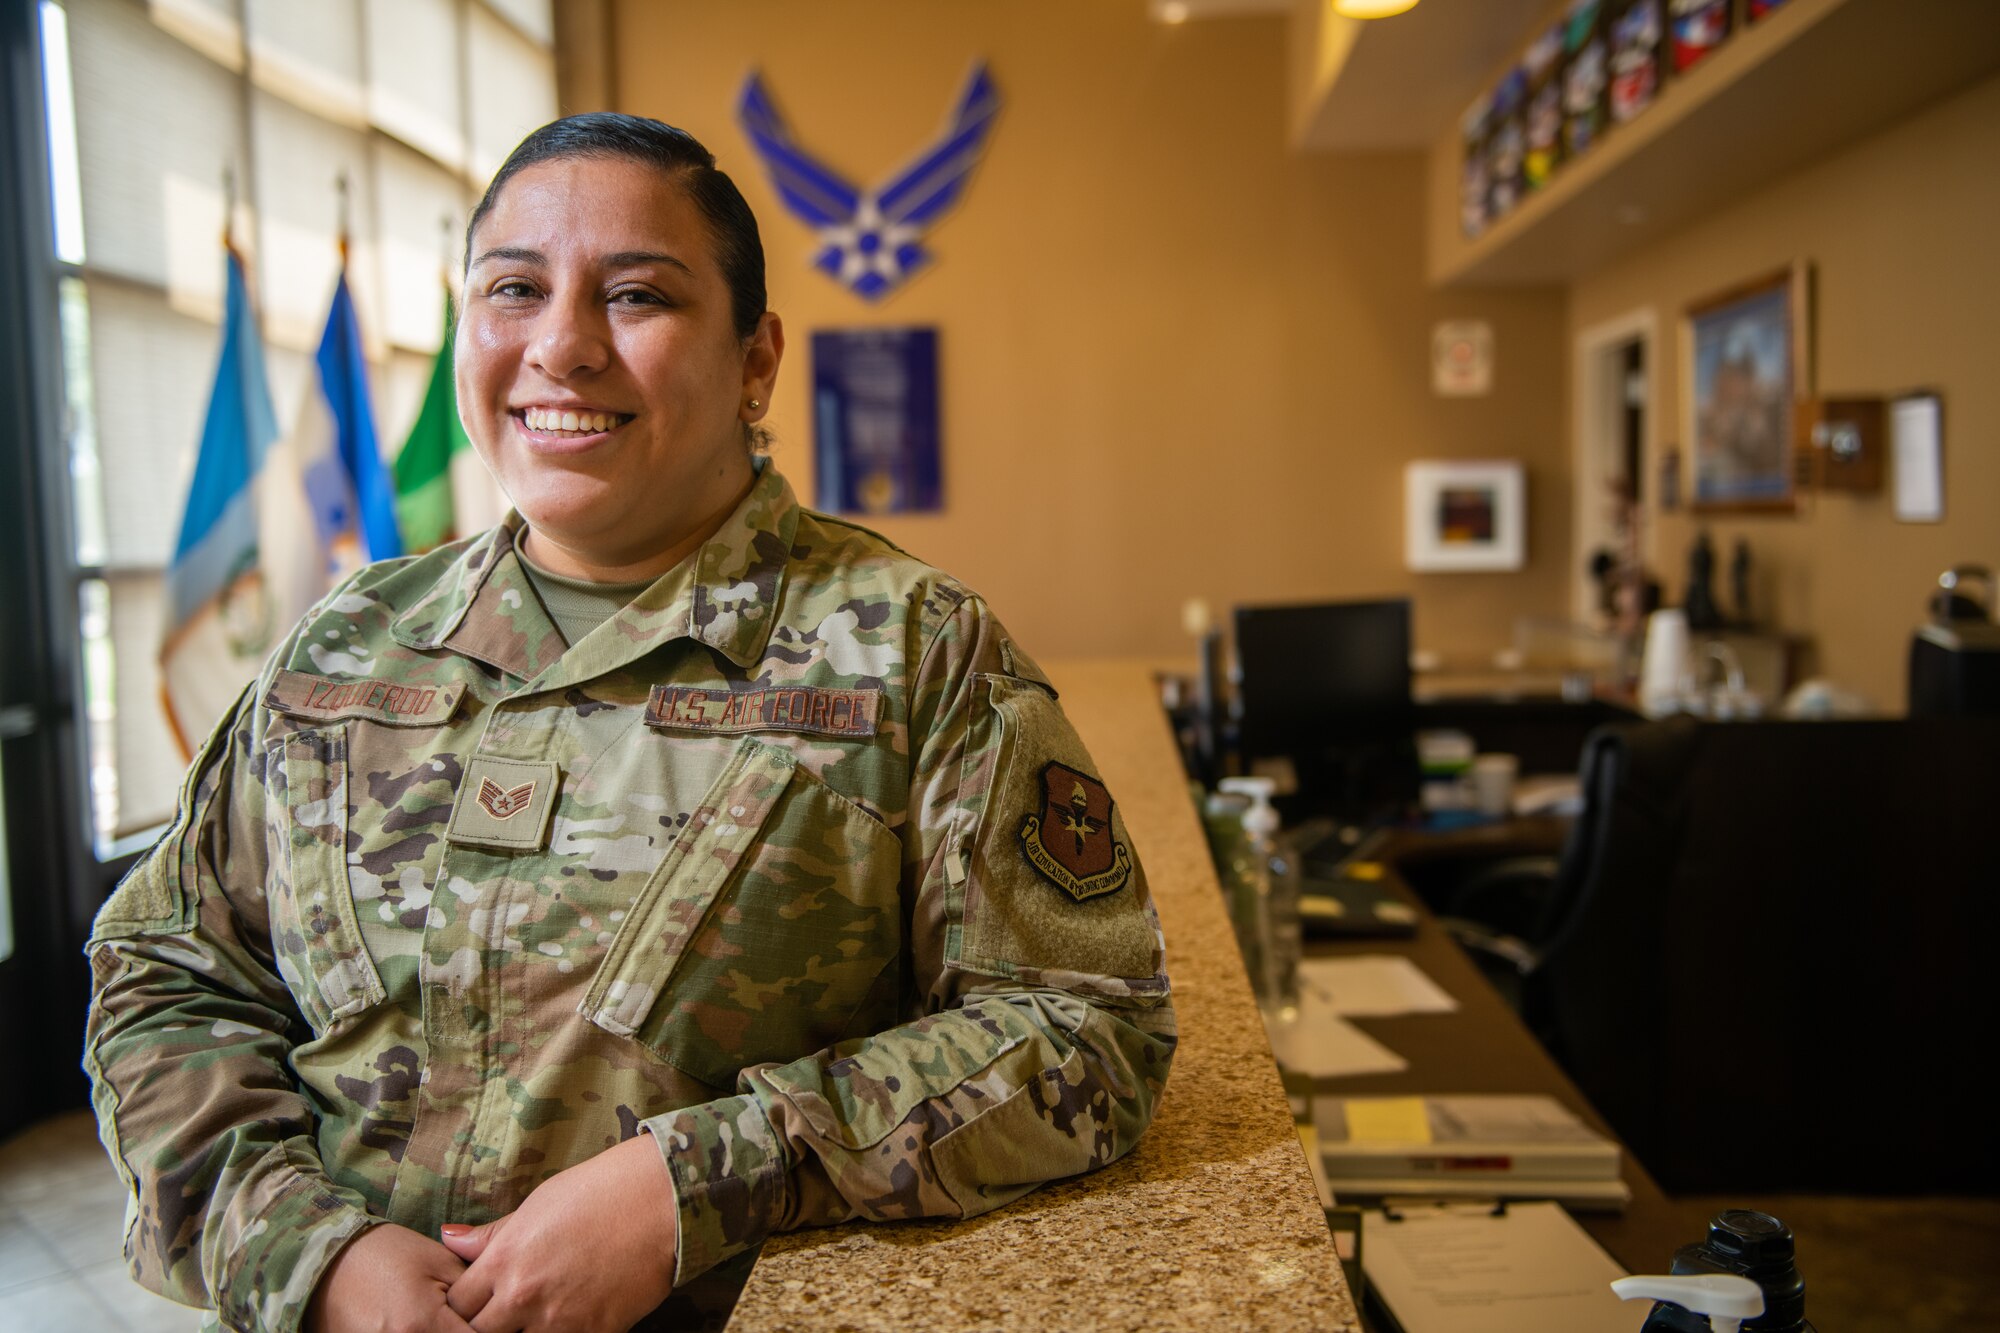 U.S. Air Force Staff Sgt. Soleine Izquierdo, Inter-American Air Forces Academy international student manager, pose for a photo Sept. 17, 2020, at Joint Base San Antonio-Lackland, Texas.